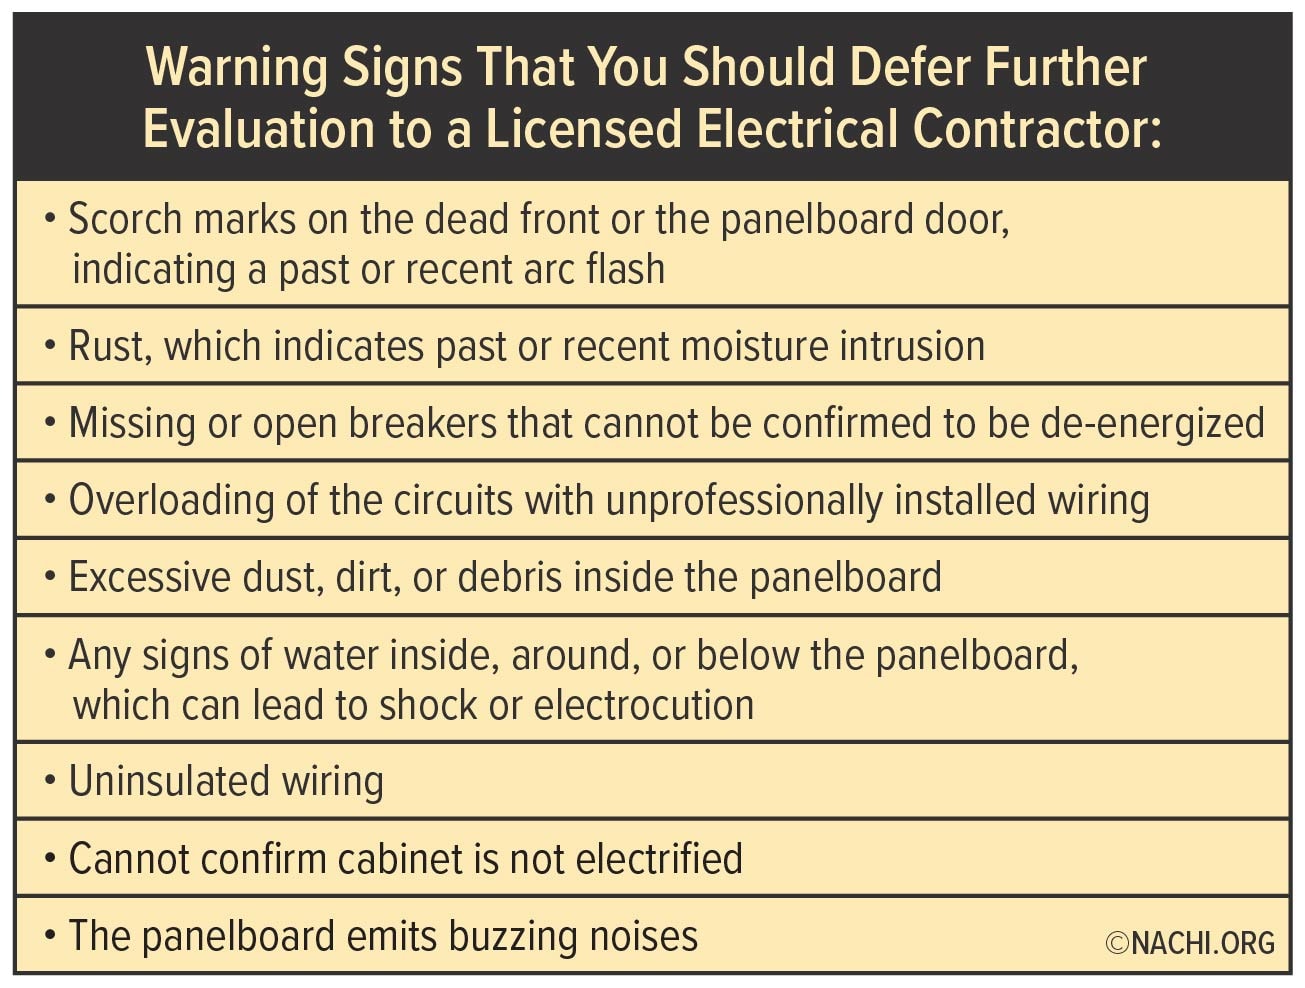 Warning signs that you should defer further evaluation to a licensed electrical contractor.